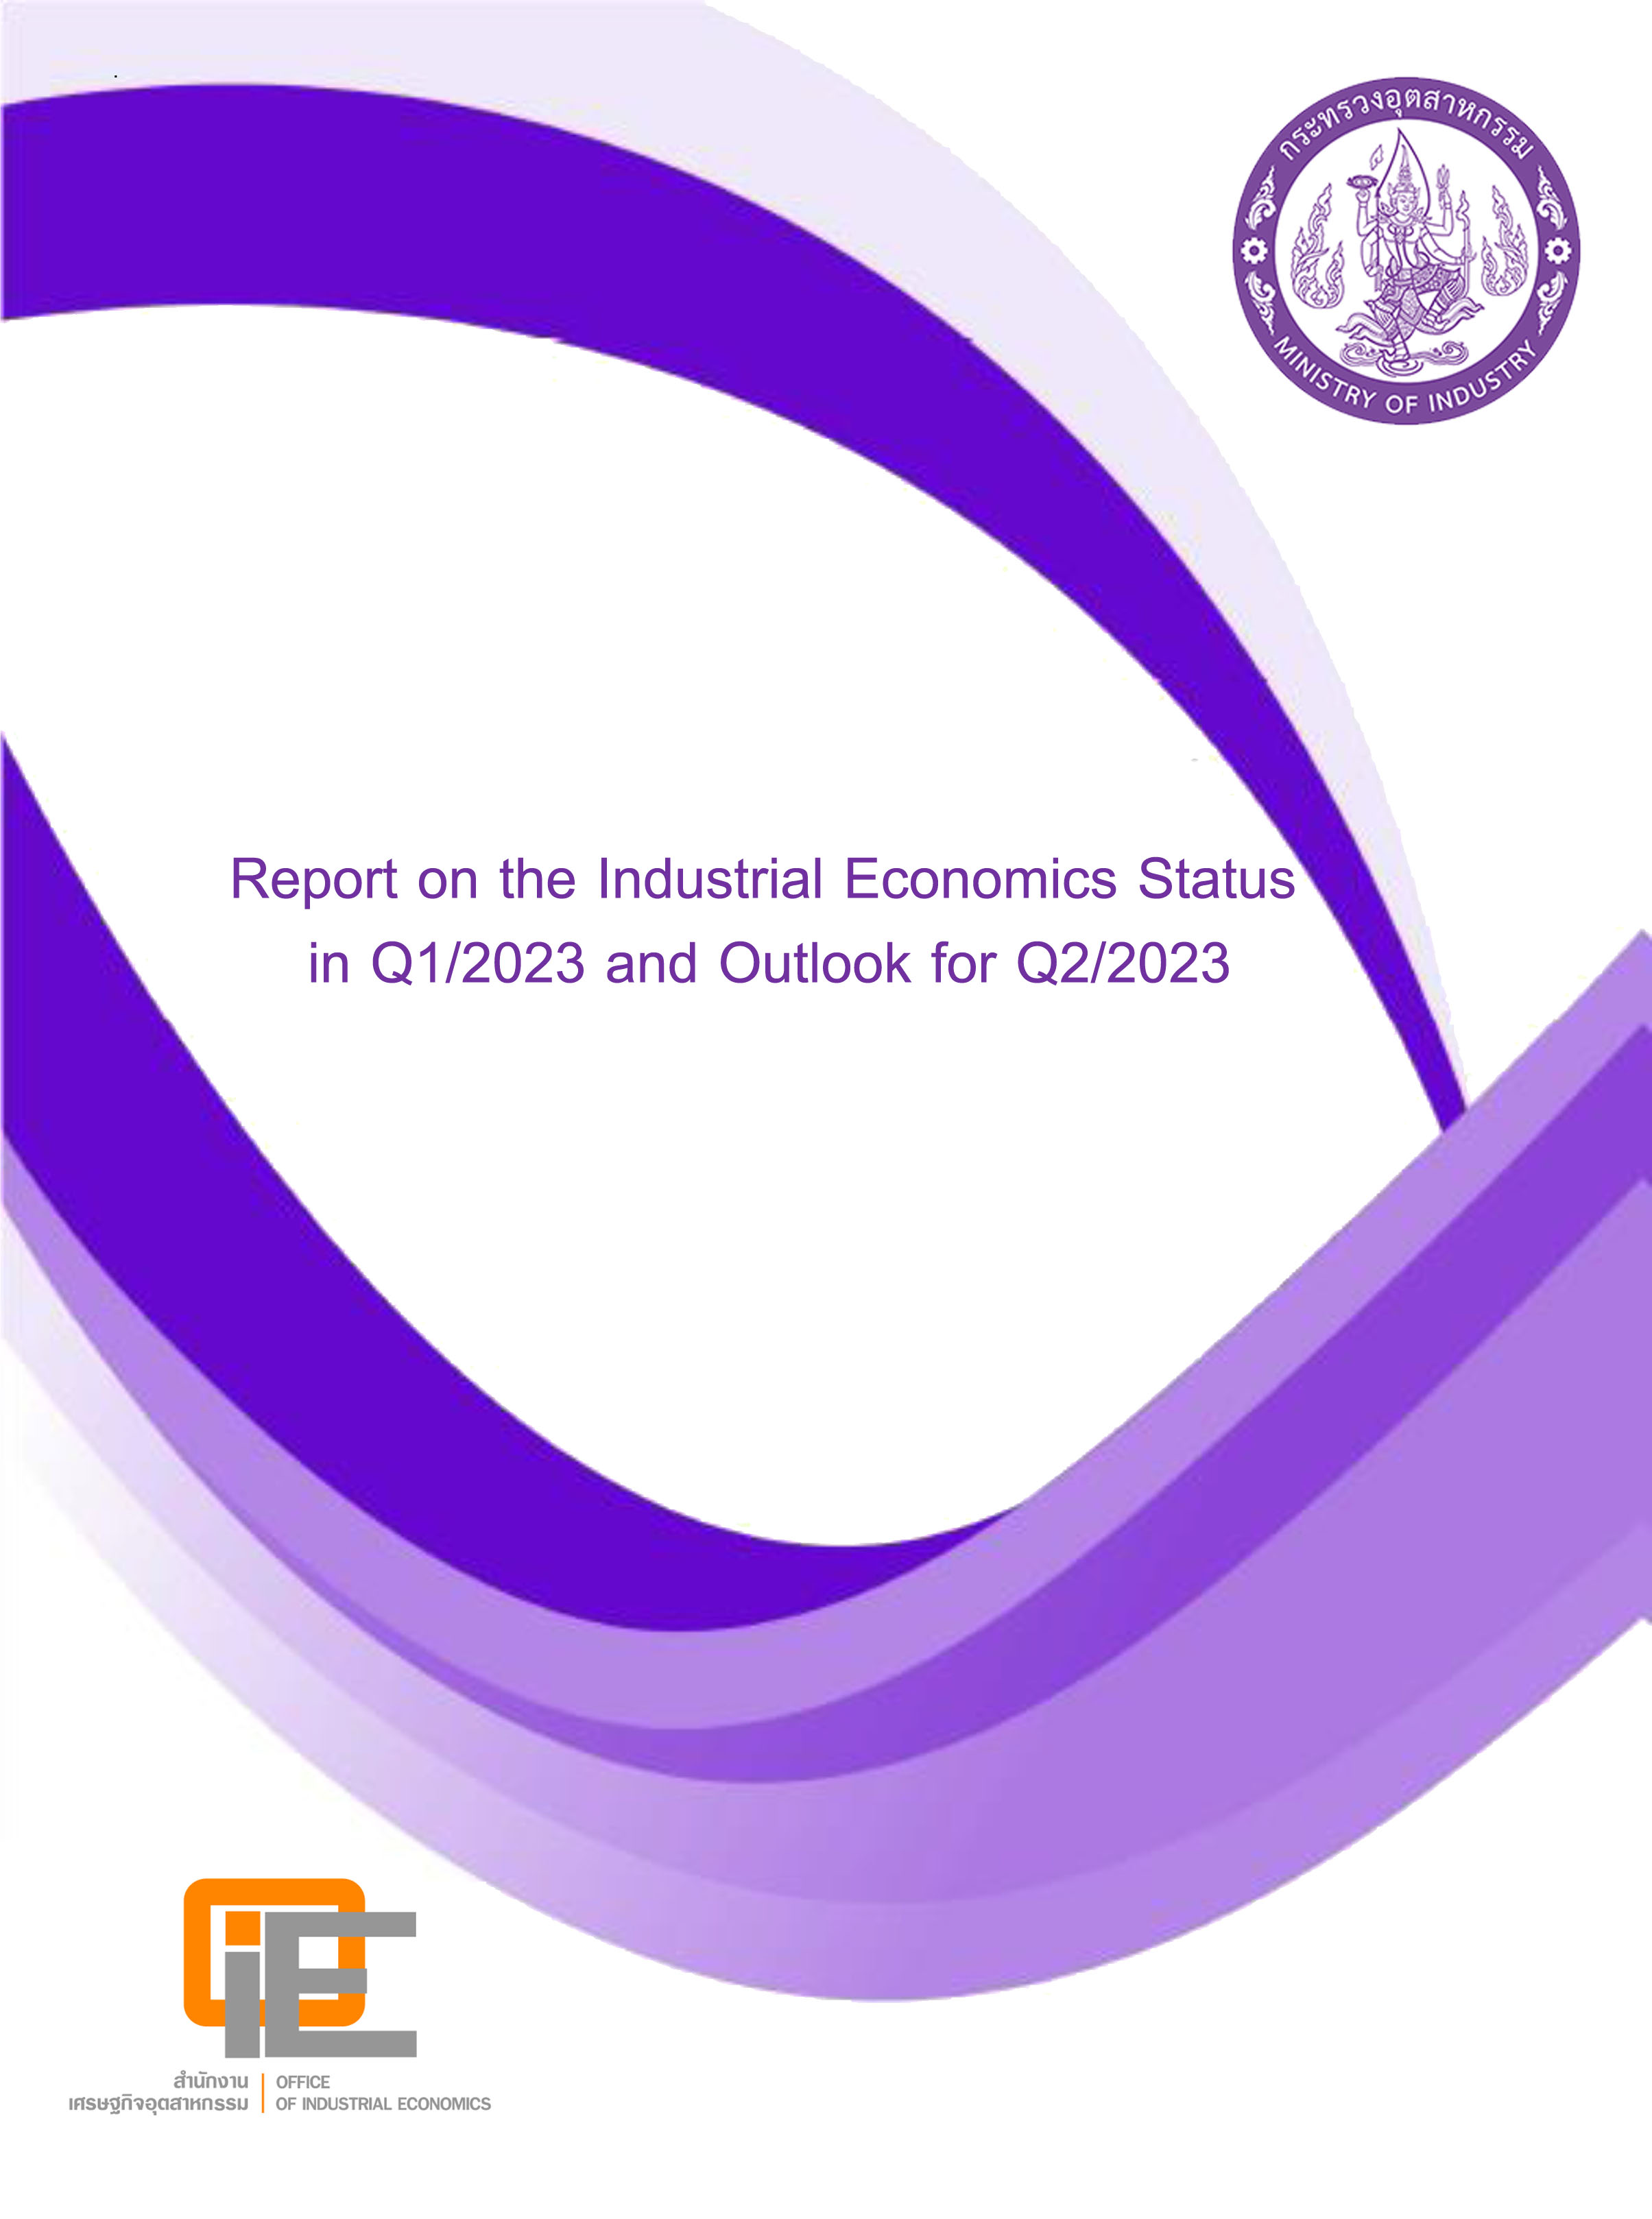 Report on the Industrial Economics Status in Q1/2023 and Outlook for Q2/2023